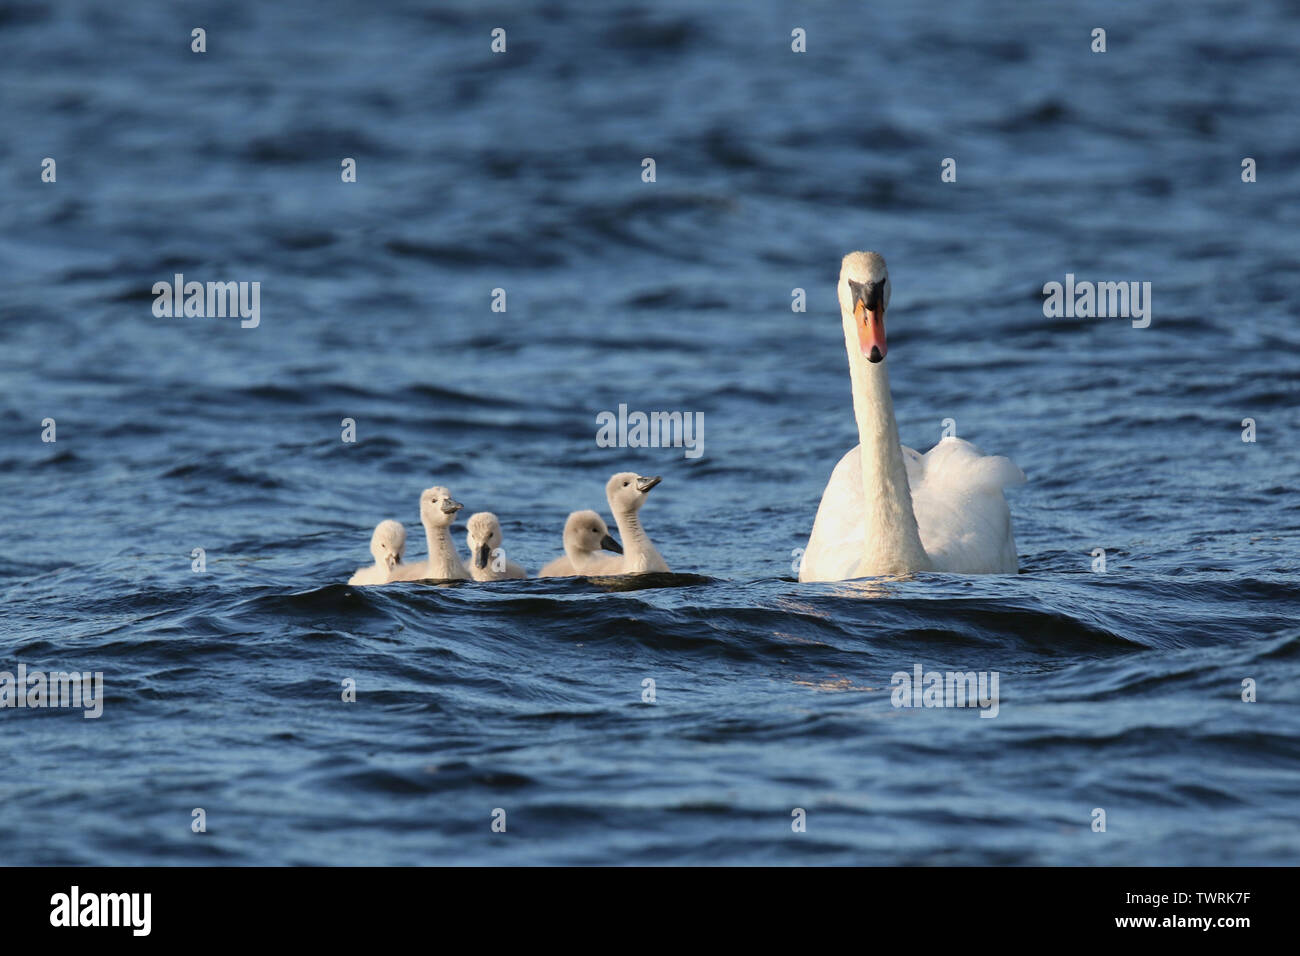 A mother Mute Swan Cygnus olor swimming with five young cygnets Stock Photo